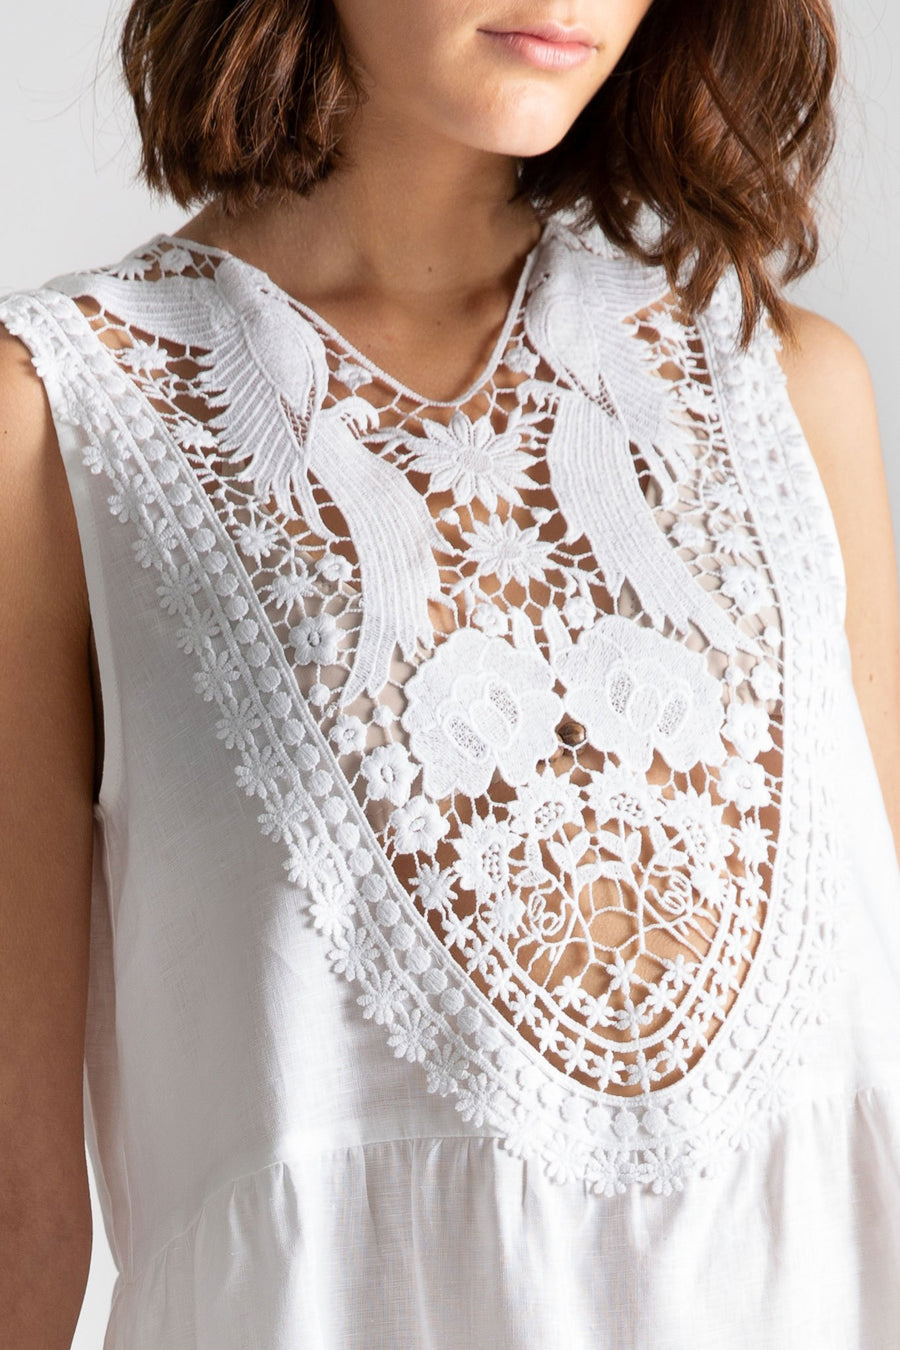 This is a detail photo of a white yolk on top of a short linen dress. The yolk design has flowers and birds and shows through to her bikini top.